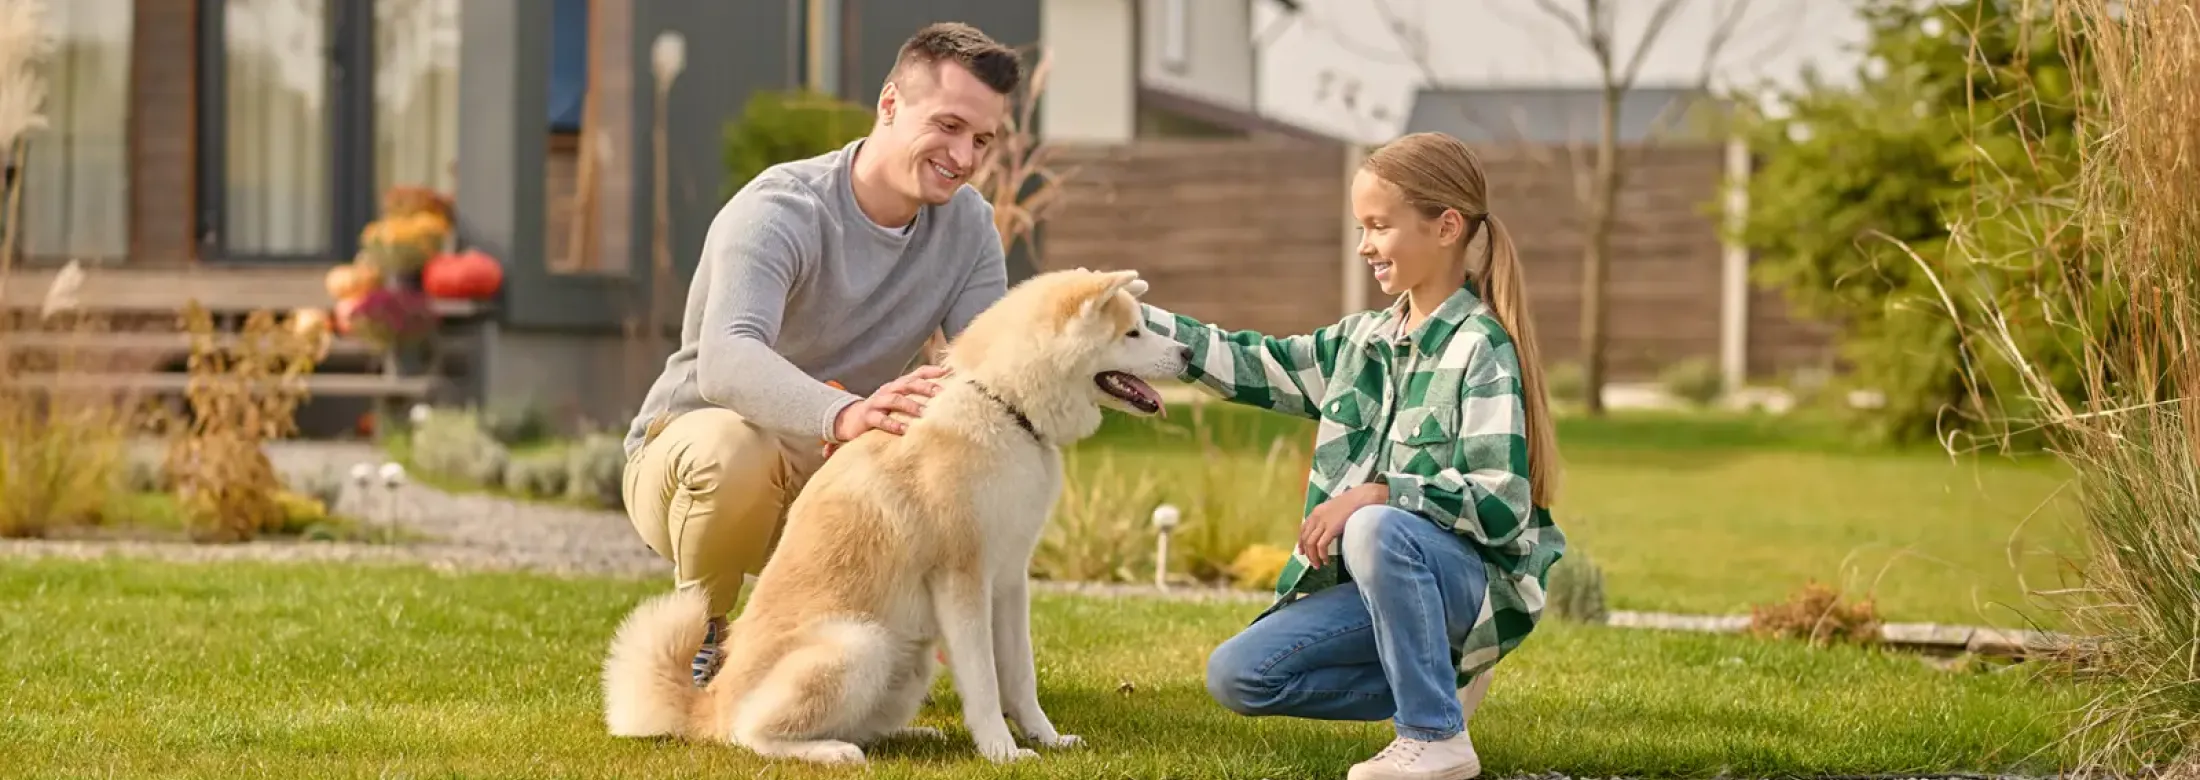 father and daughter petting dog